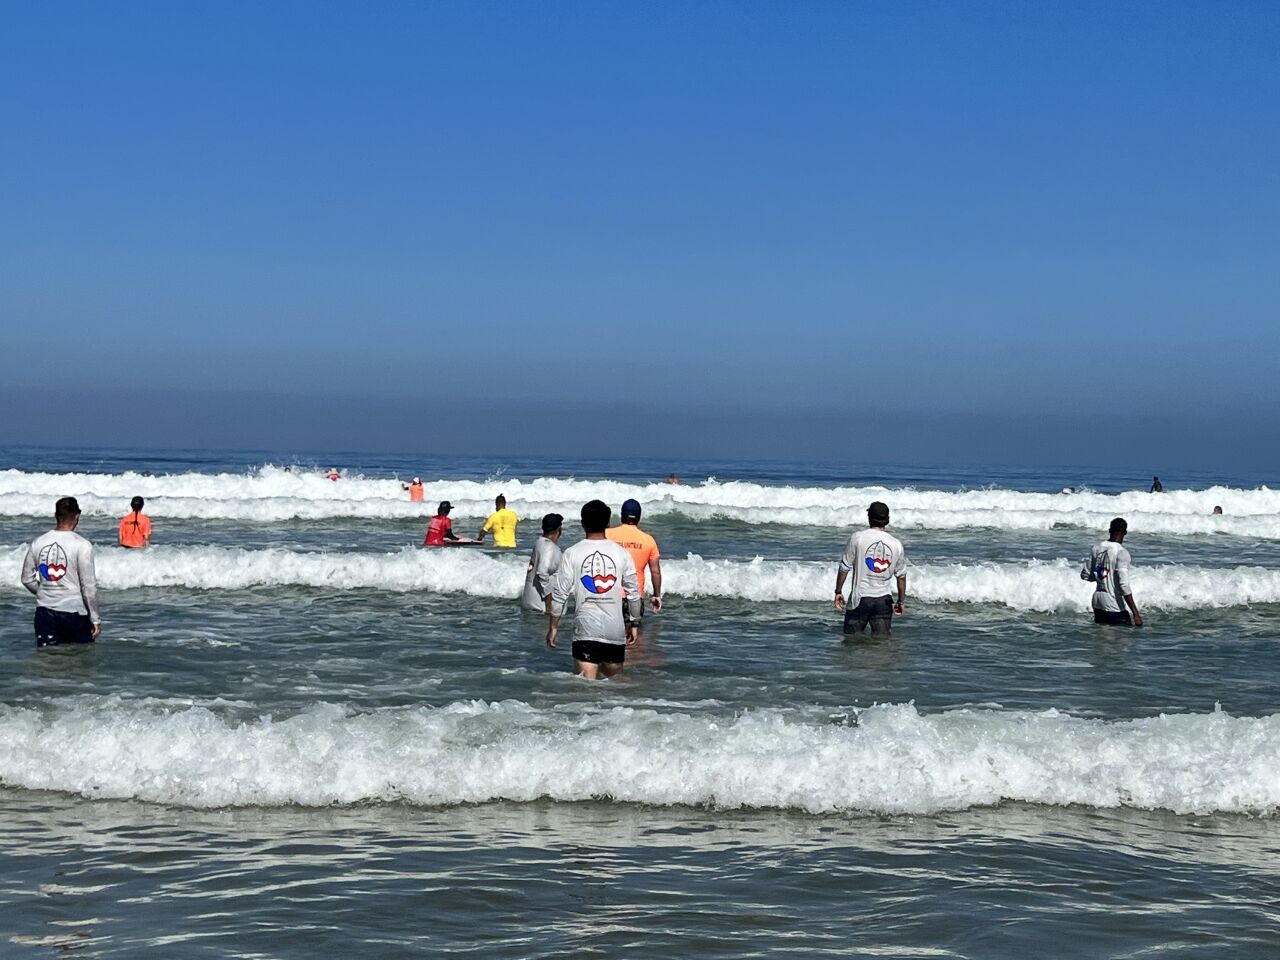 Veterans and volunteers from all over the country gather to surf at La Jolla Shores during the National Veterans Summer Sports Clinic.